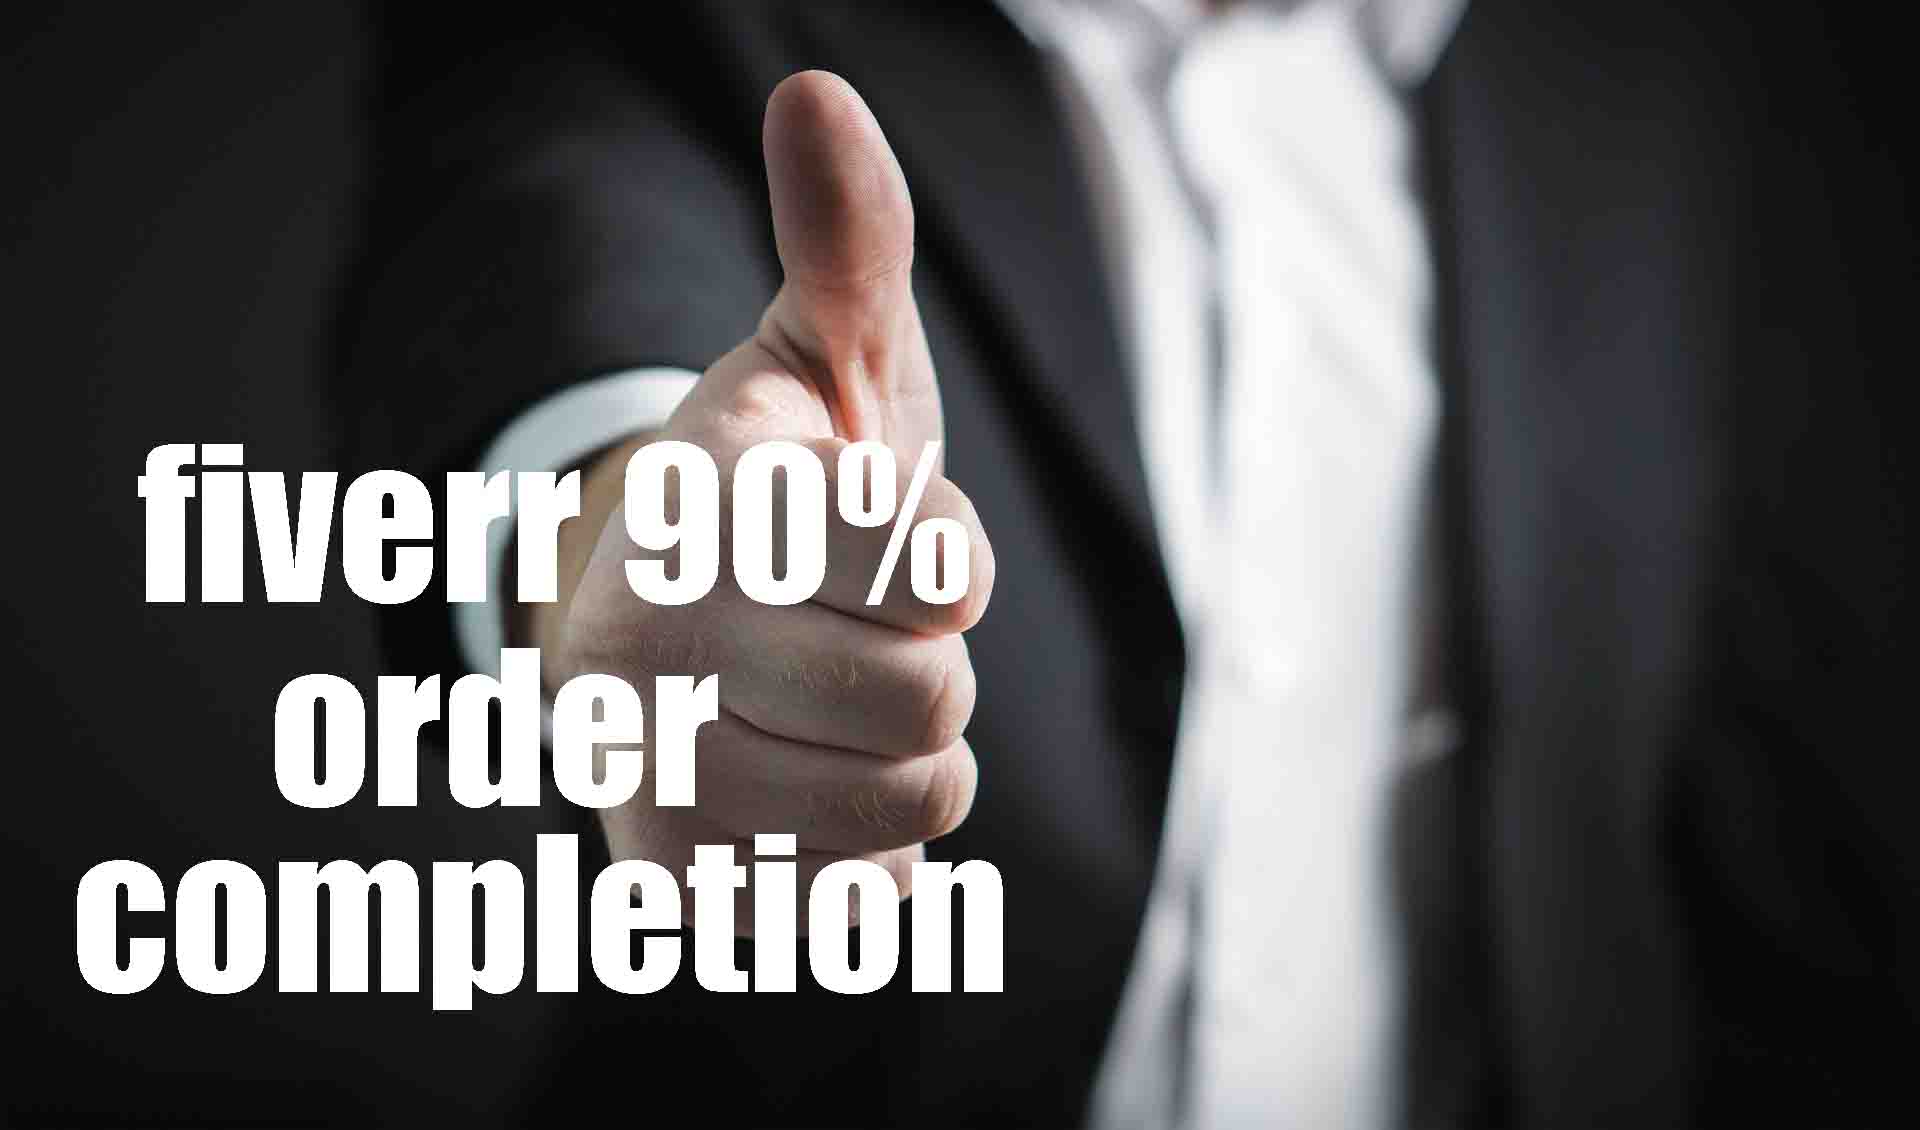 Getting 90% order completion rate on Fiverr